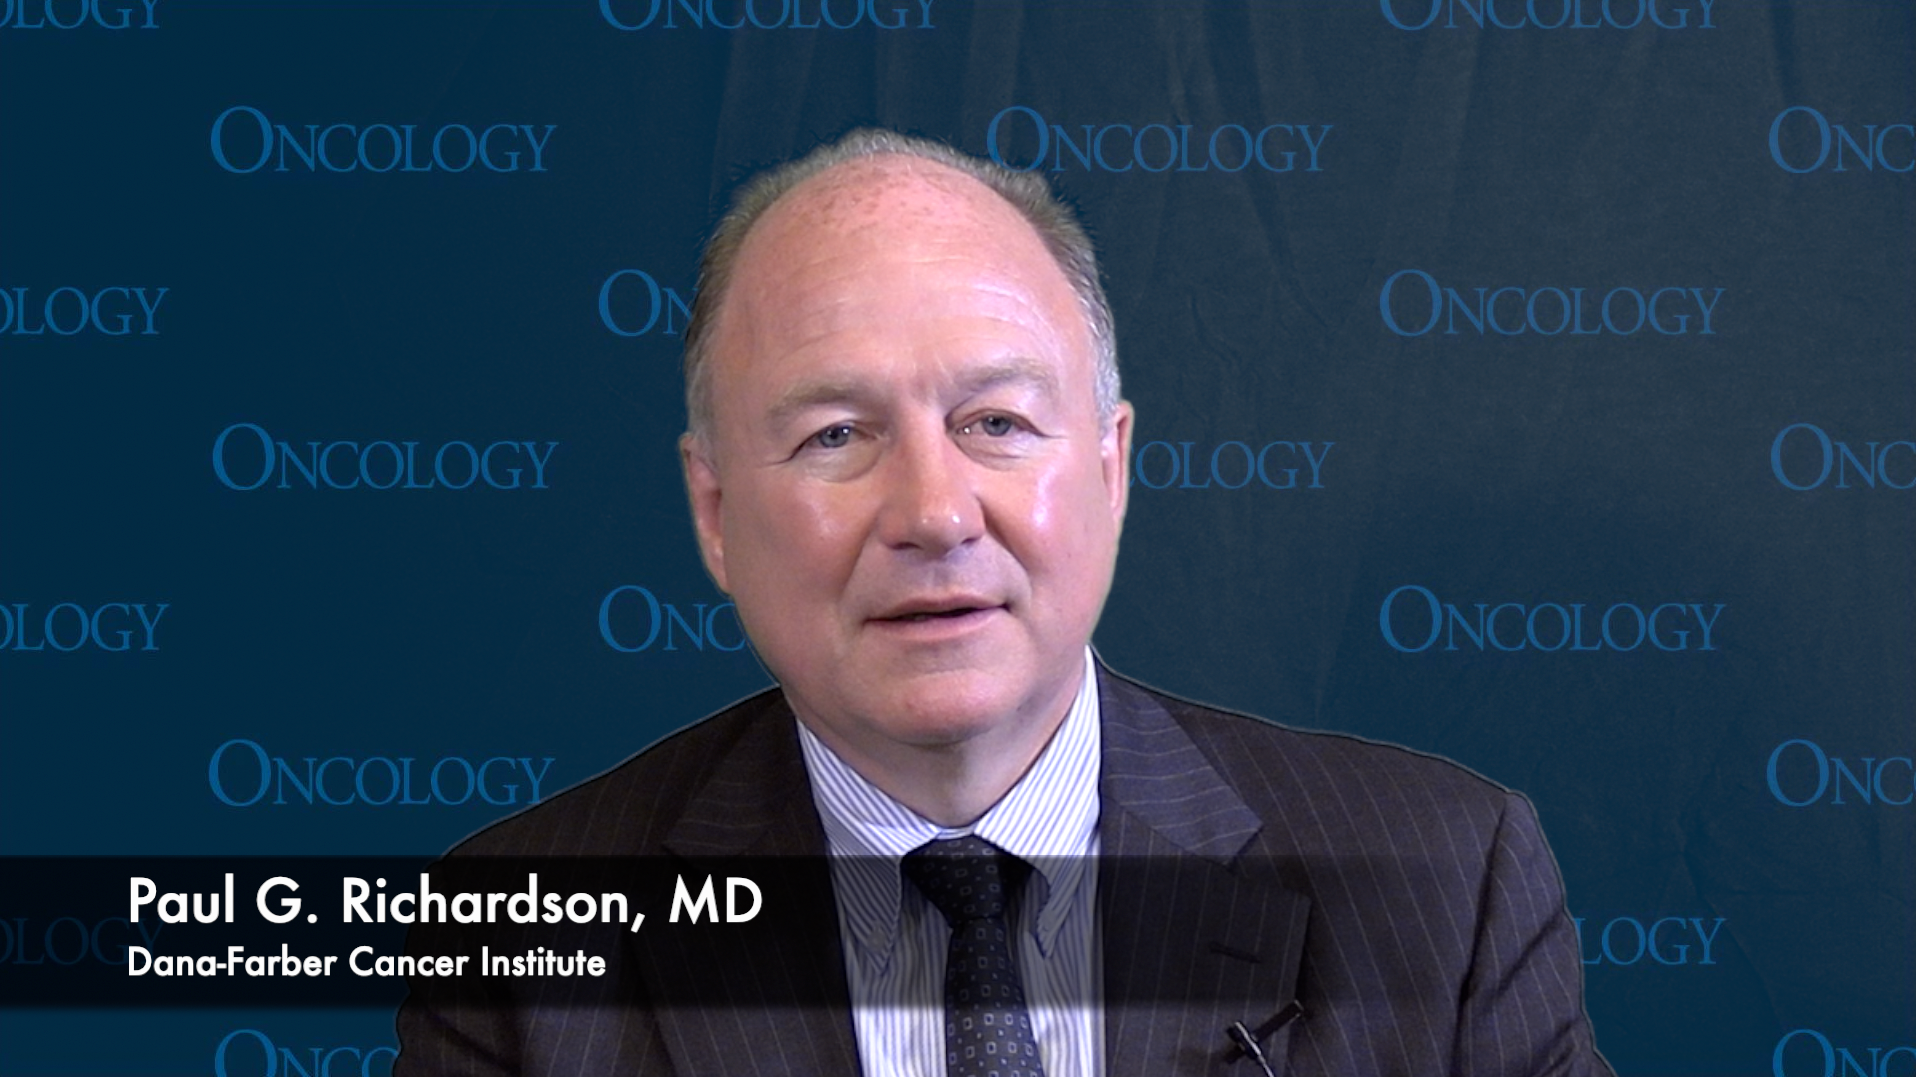 Paul G. Richardson, MD, Highlights Benefits of Continuous Lenalidomide Maintenance Vs ASCT in Newly Diagnosed Myeloma